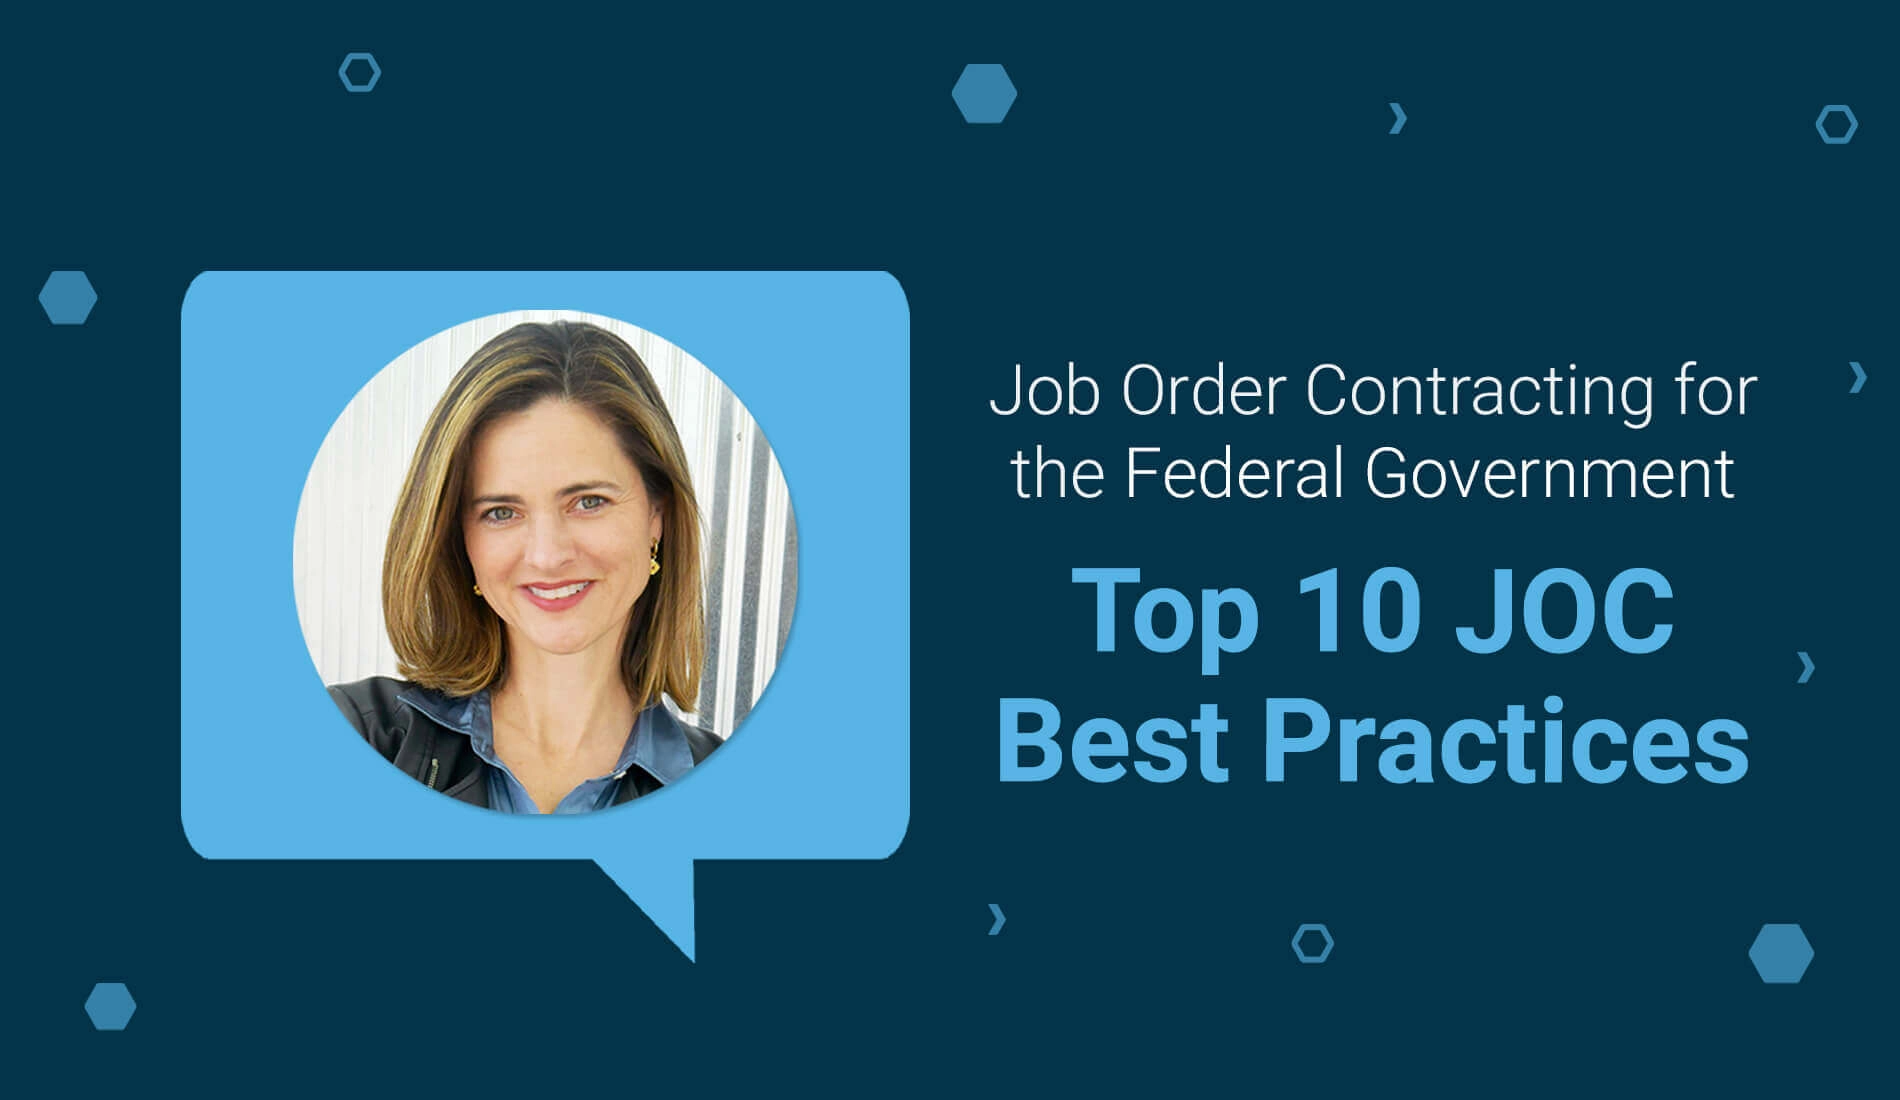 Top 10 JOC Best Practices for the Federal Space